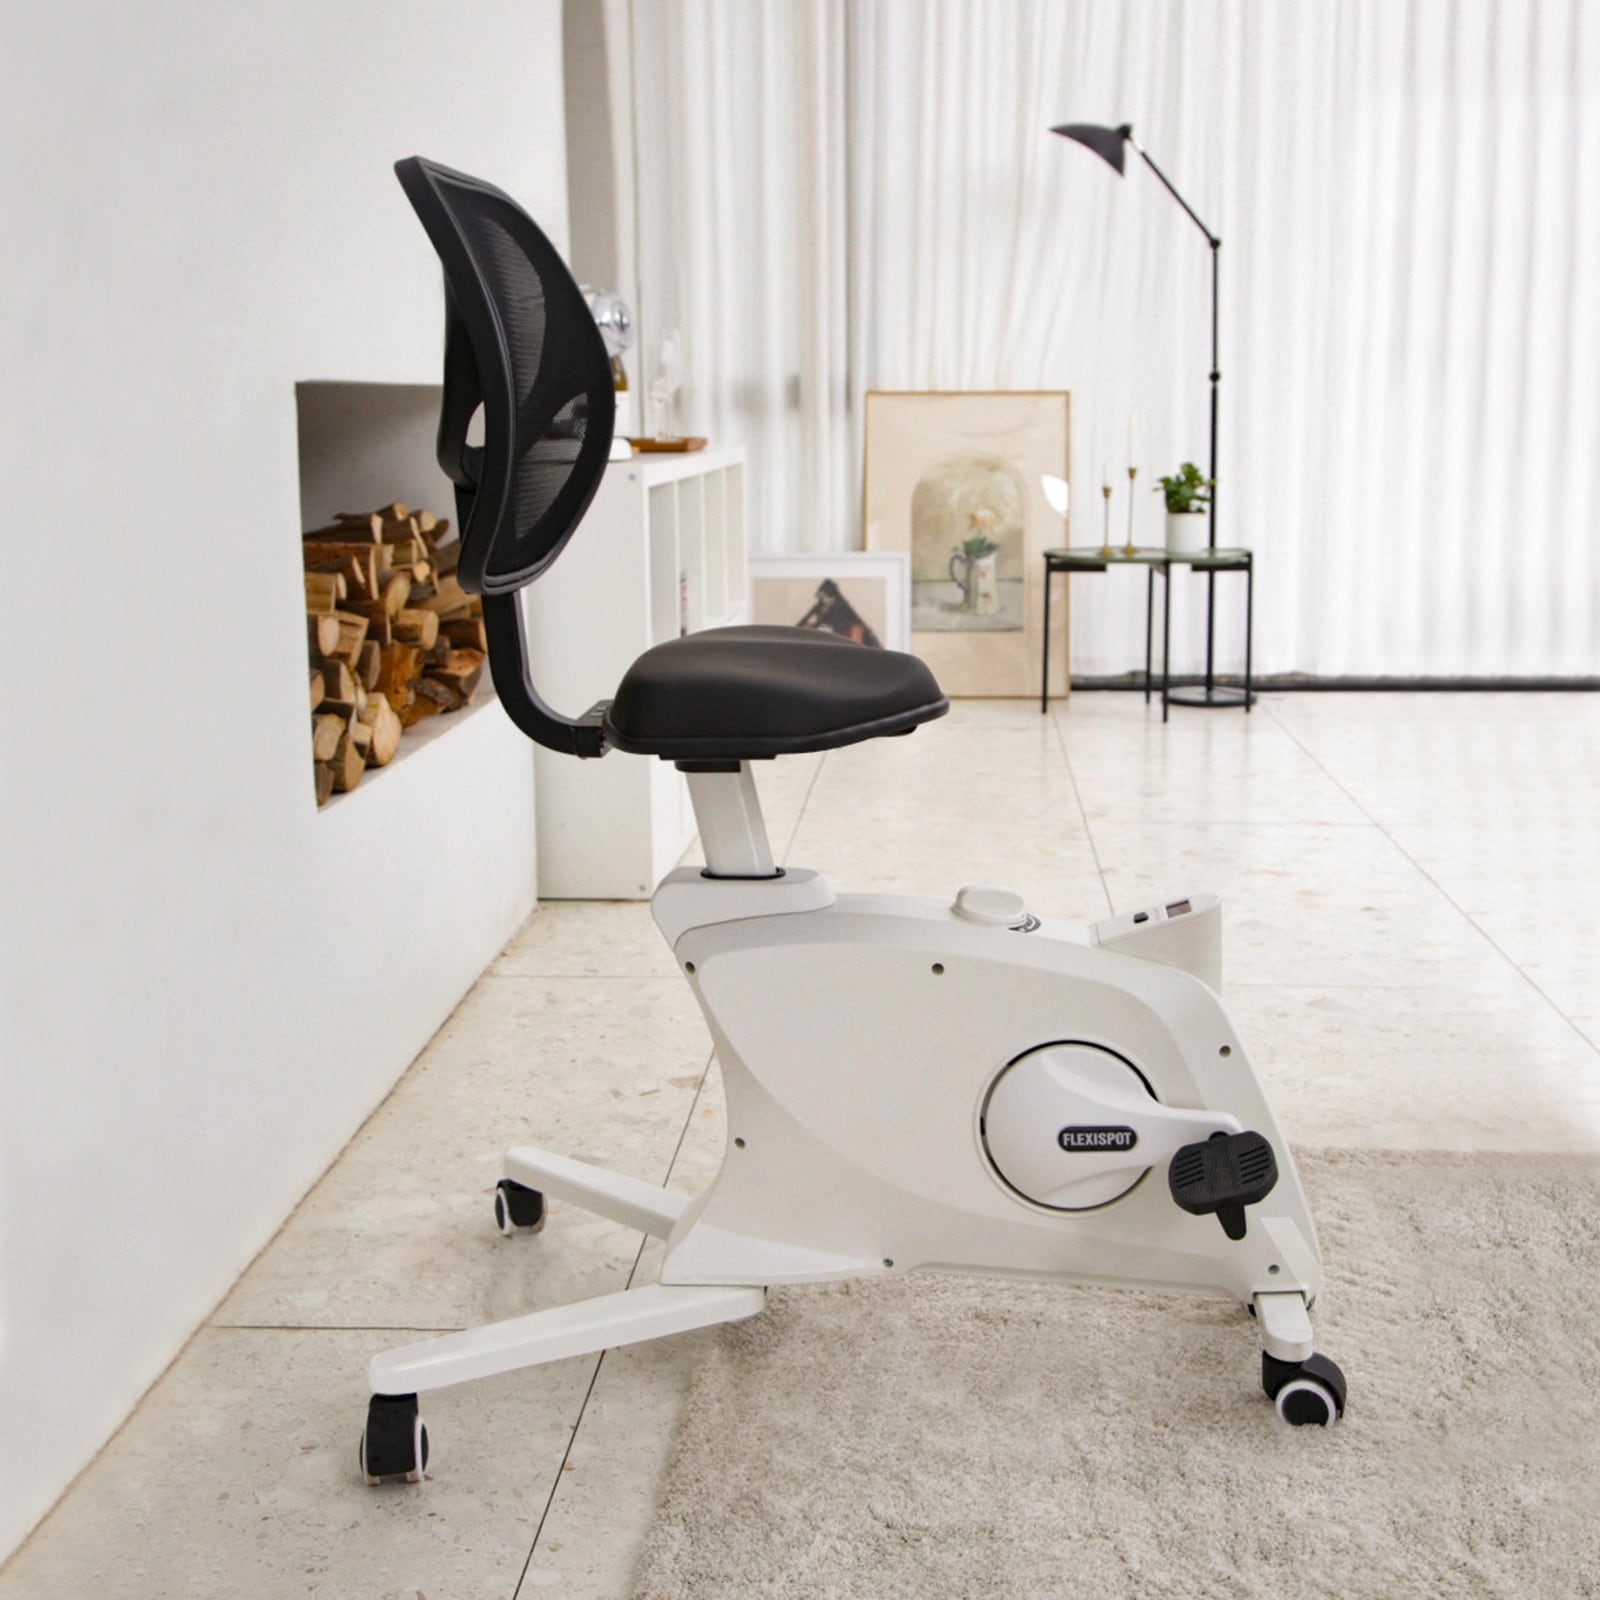 https://ak1.ostkcdn.com/images/products/is/images/direct/a65c96cbb7d4f9dffe2f82eca80edd0322dcde01/FlexiSpot-Adjustable-Exercise-Chair-Sit2Go-2-in-1-Fitness-Chair-Desk-Bike-Home-Office-Chair-Cycle-Exercise-Bike.jpg